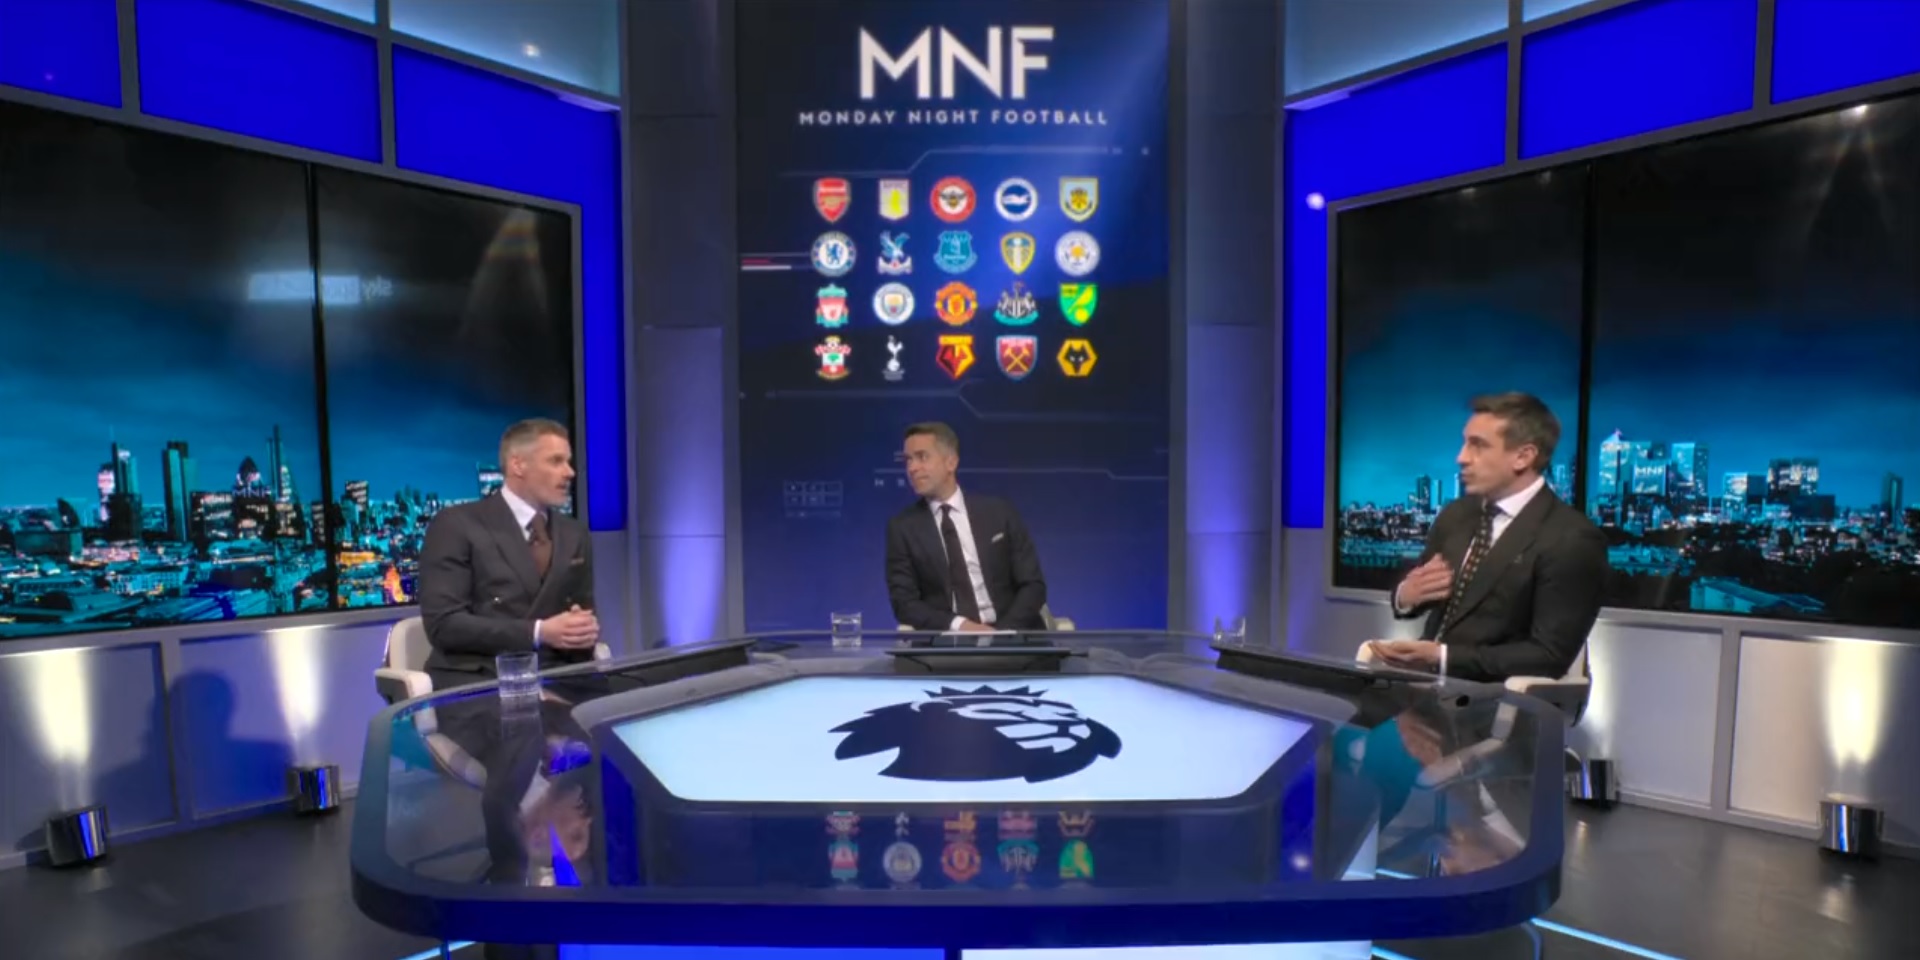 Neville says Liverpool have an ‘unbelievable’ player who is best in his position in the PL ‘by a mile’ – Carragher can’t believe it